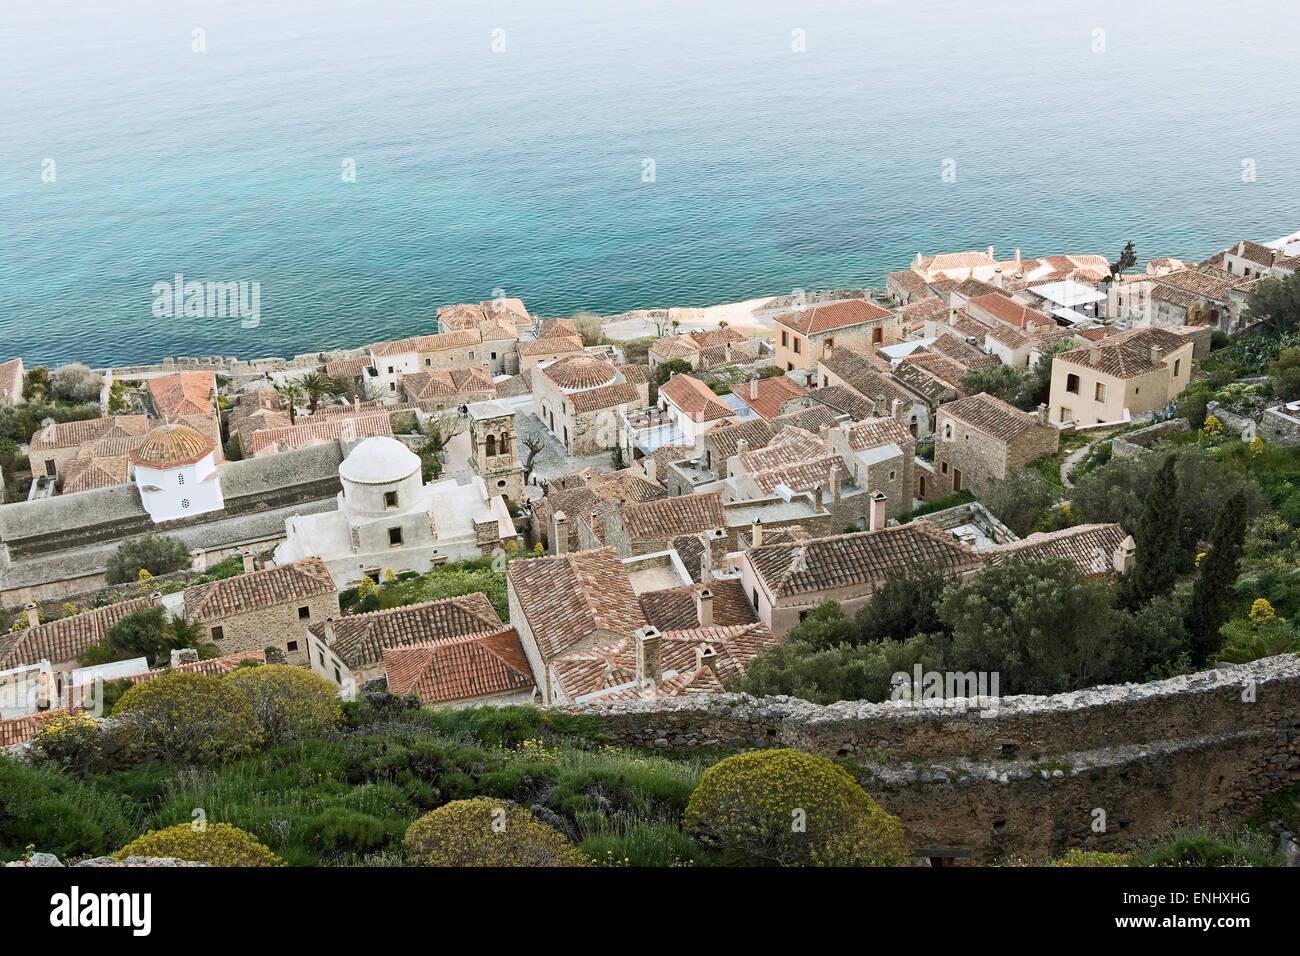 The historical castle-town of Monemvasia, southern Greece Stock Photo